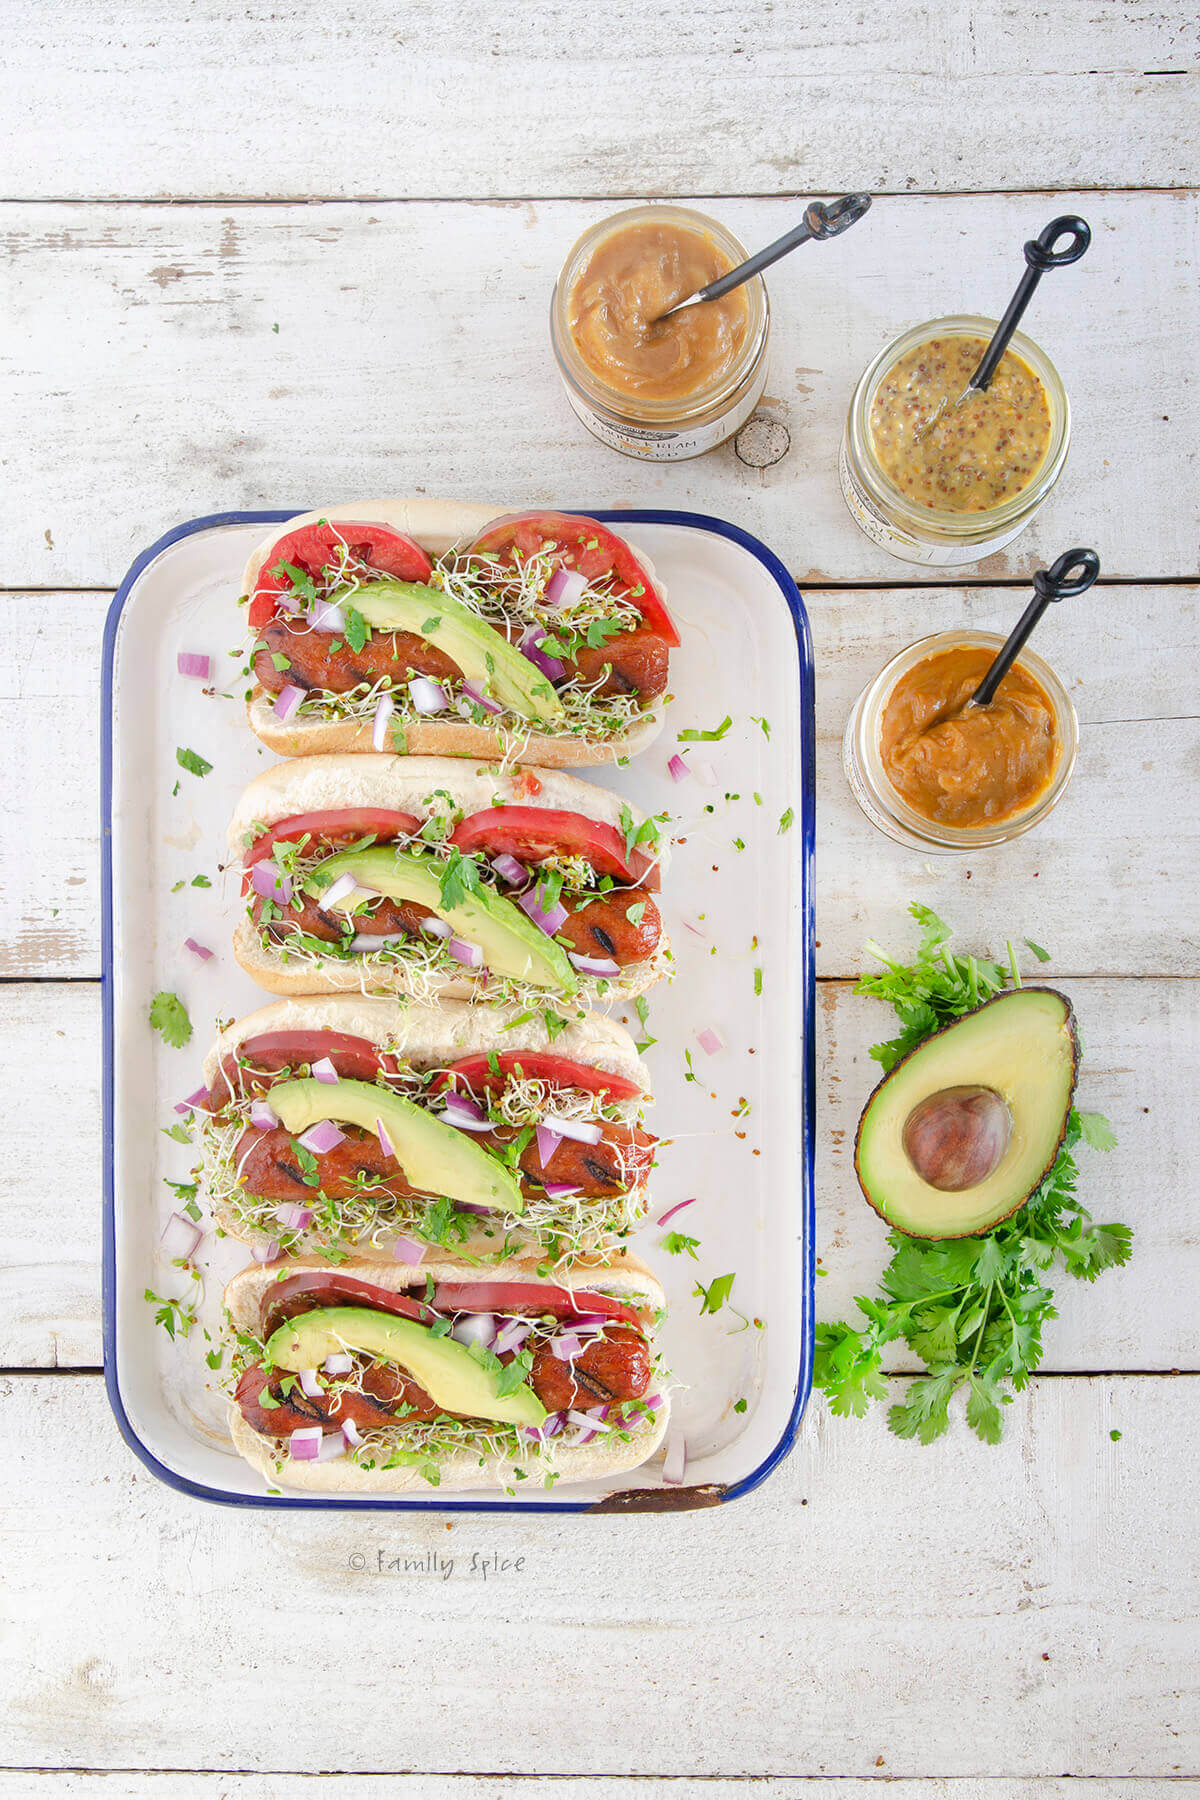 Top view of four gourmet hot dogs with tomatoes, avocado slices and sprouts with a halved avocado and mustard jars next to it